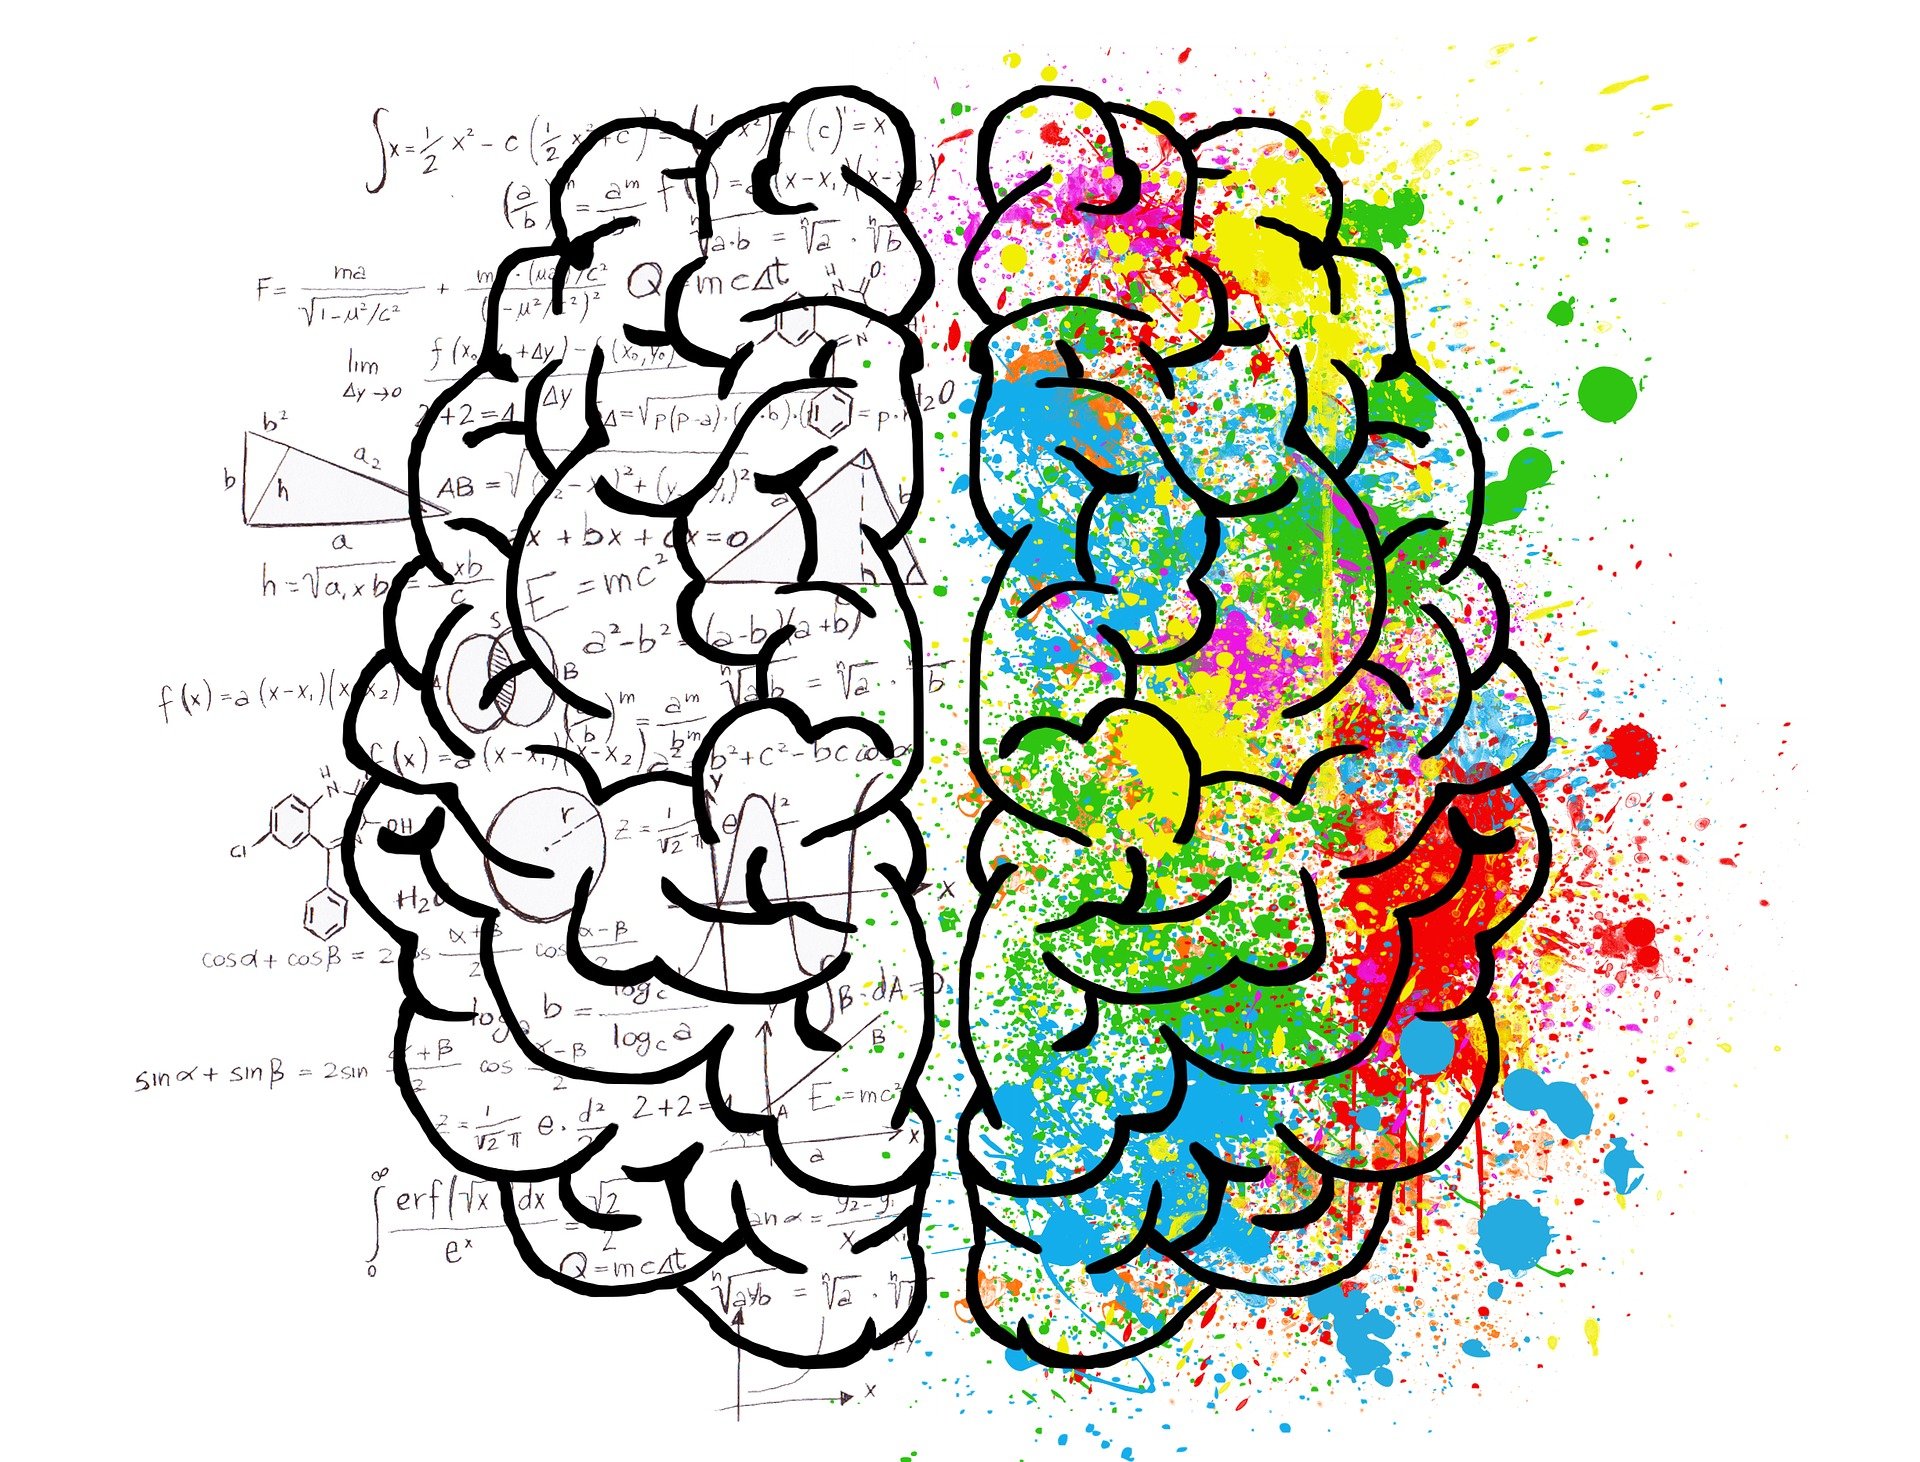 Graphic of the brain. The right side is colorful and the left side contains mathematical equations.